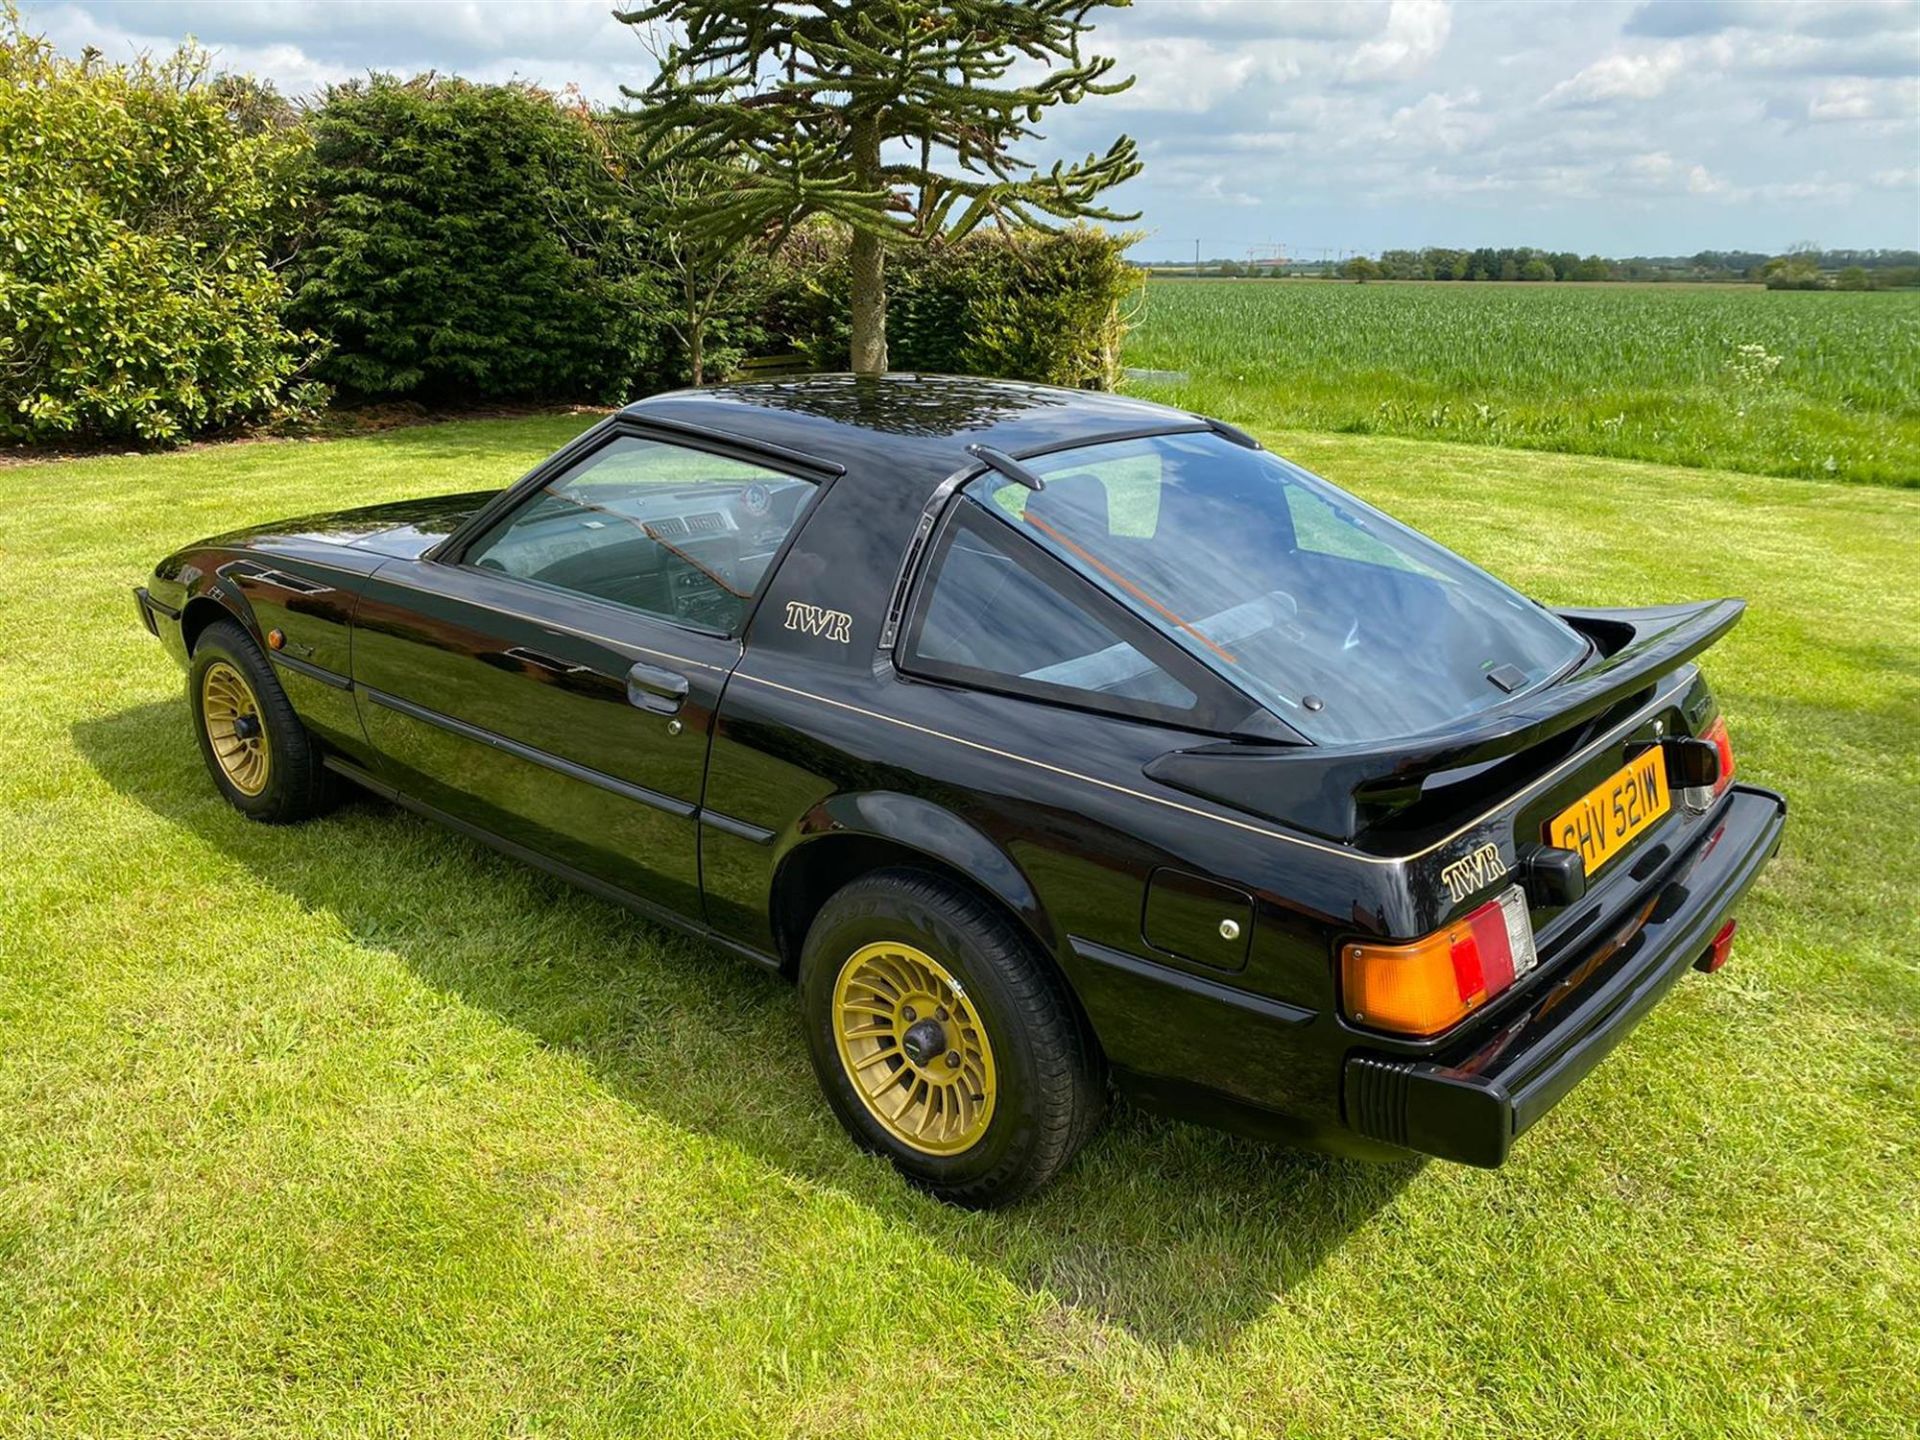 1980 Mazda RX-7 Series 1 (TWR) - Image 7 of 10